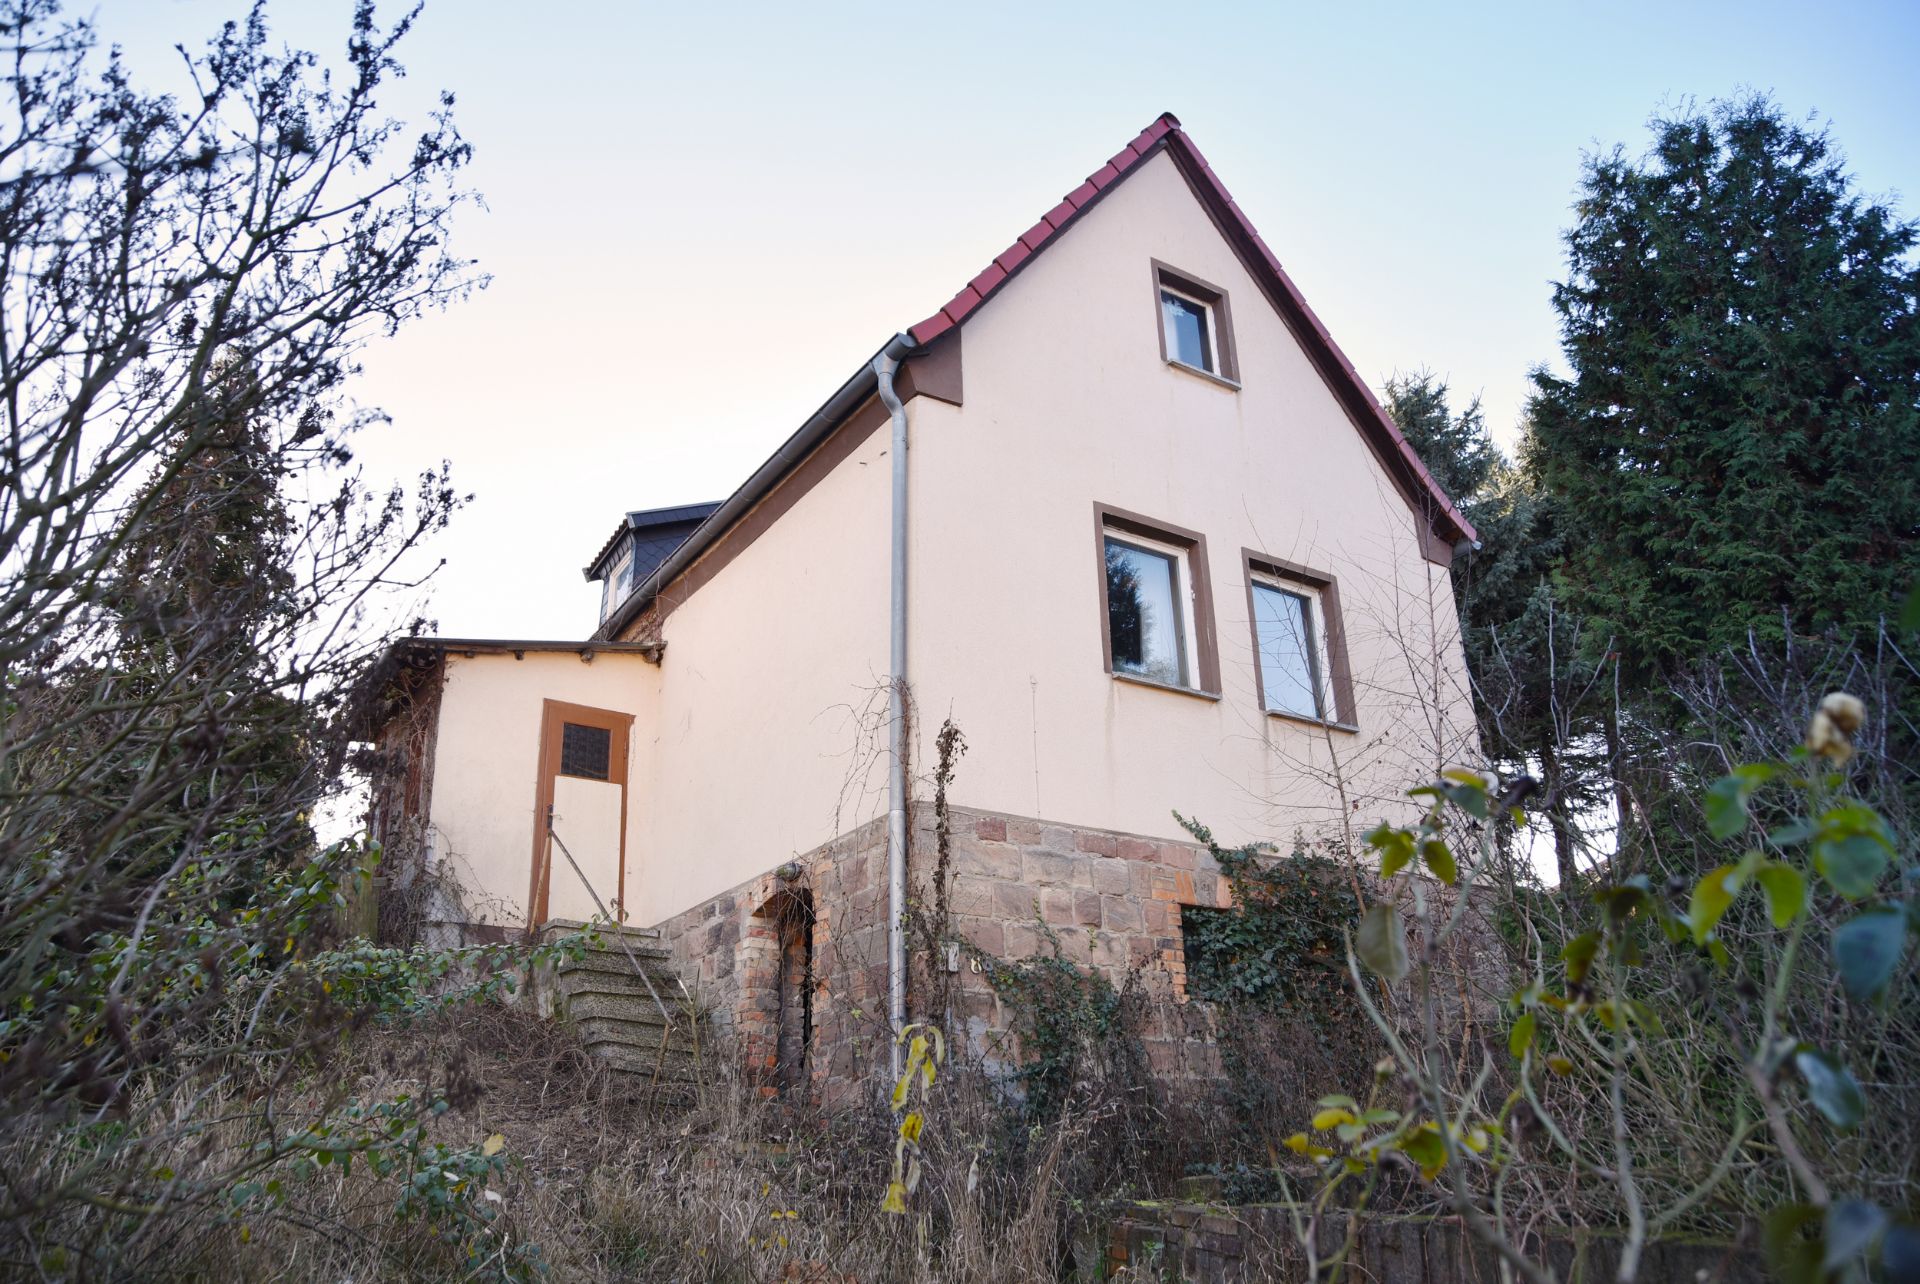 LARGE FREEHOLD HOUSE AND LAND IN SAXONY-ANHALT, GERMANY